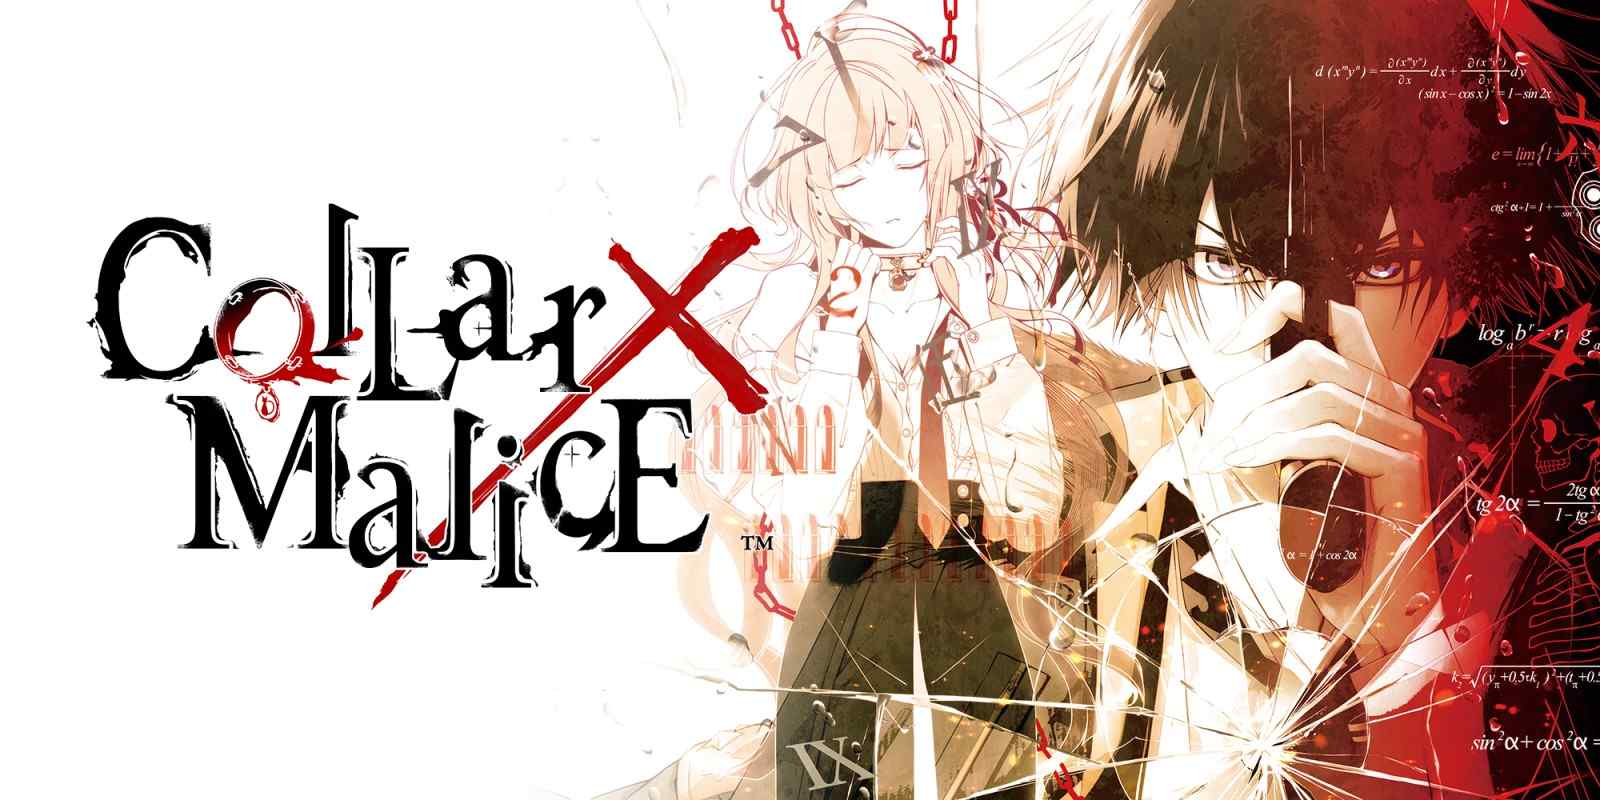 Collar Malice is a visual novel video game made by Idea Factory and released under their Otomate brand.